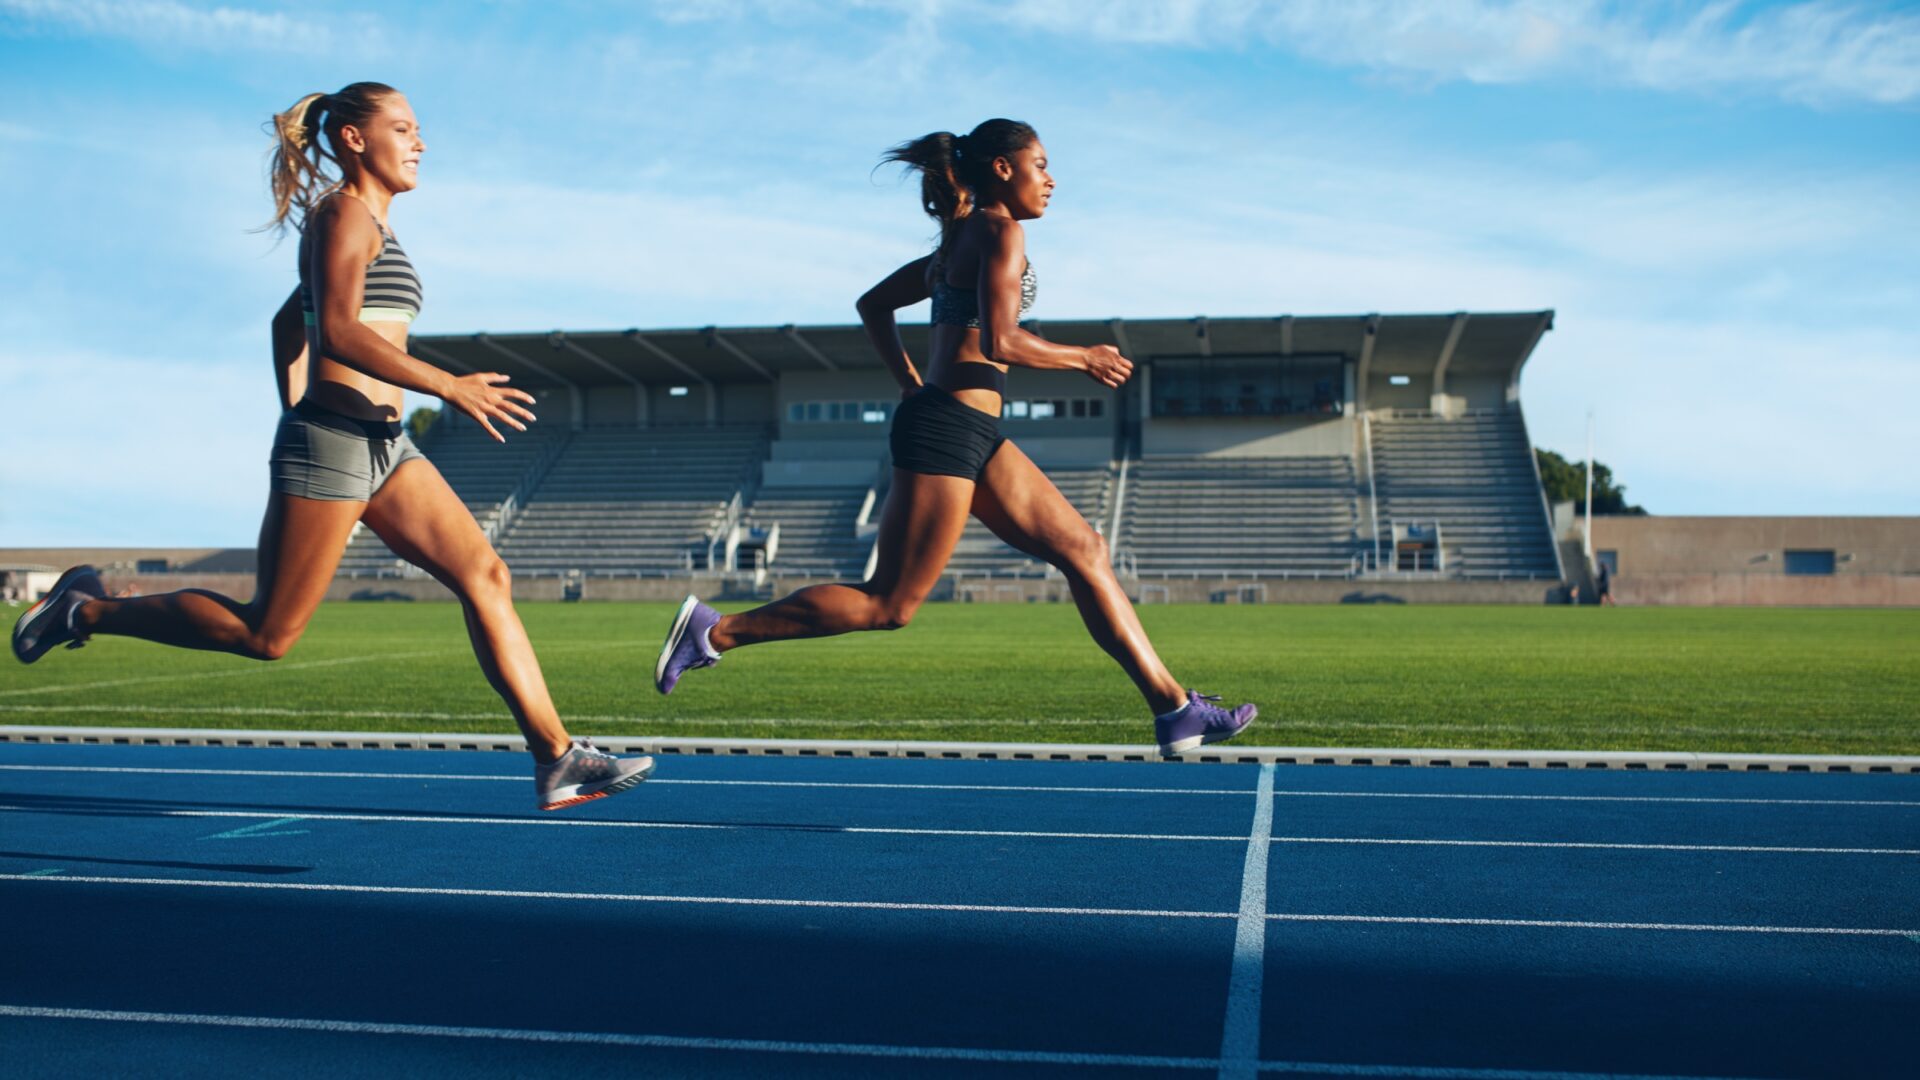 Two women jogging across a blue outdoor running track.